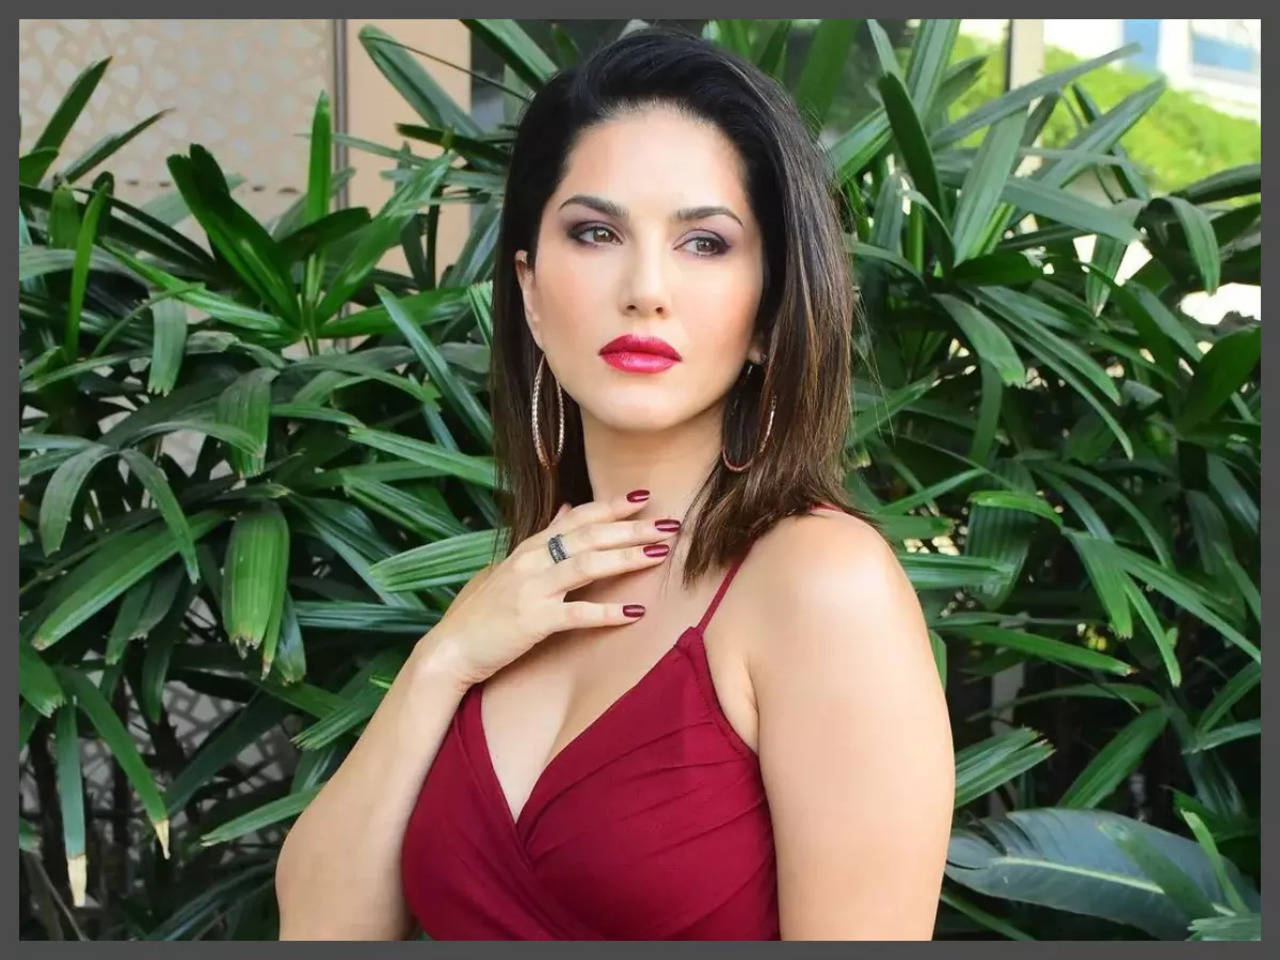 Sunny Leone speaks on her birthday and career: I am not ashamed of my past  | Hindi Movie News - Times of India